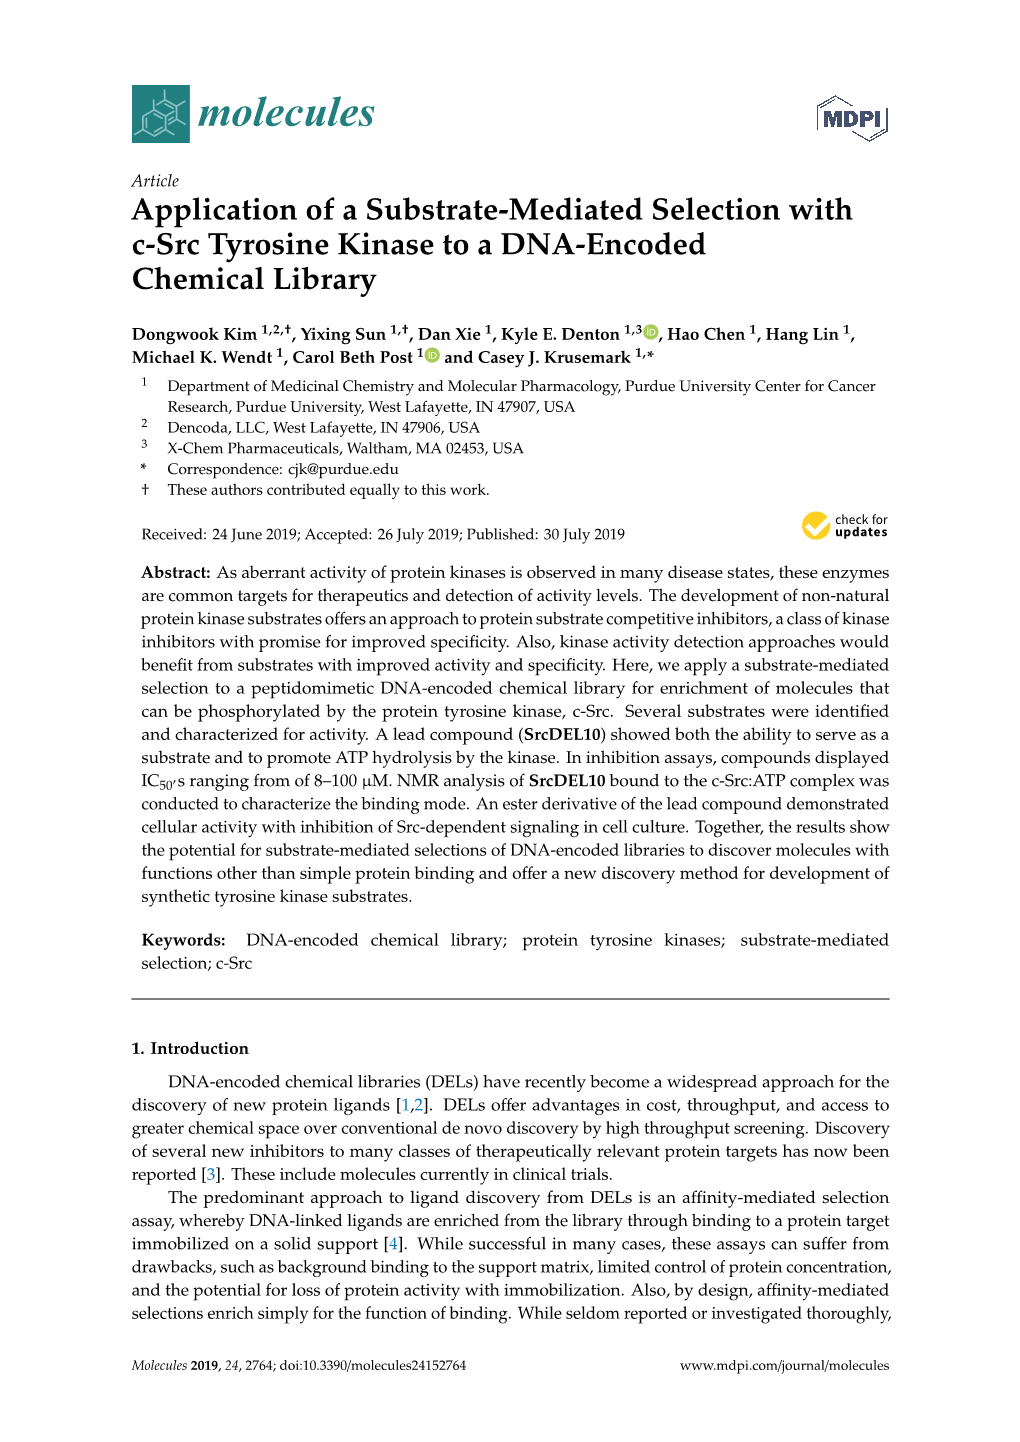 Application of a Substrate-Mediated Selection with C-Src Tyrosine Kinase to a DNA-Encoded Chemical Library